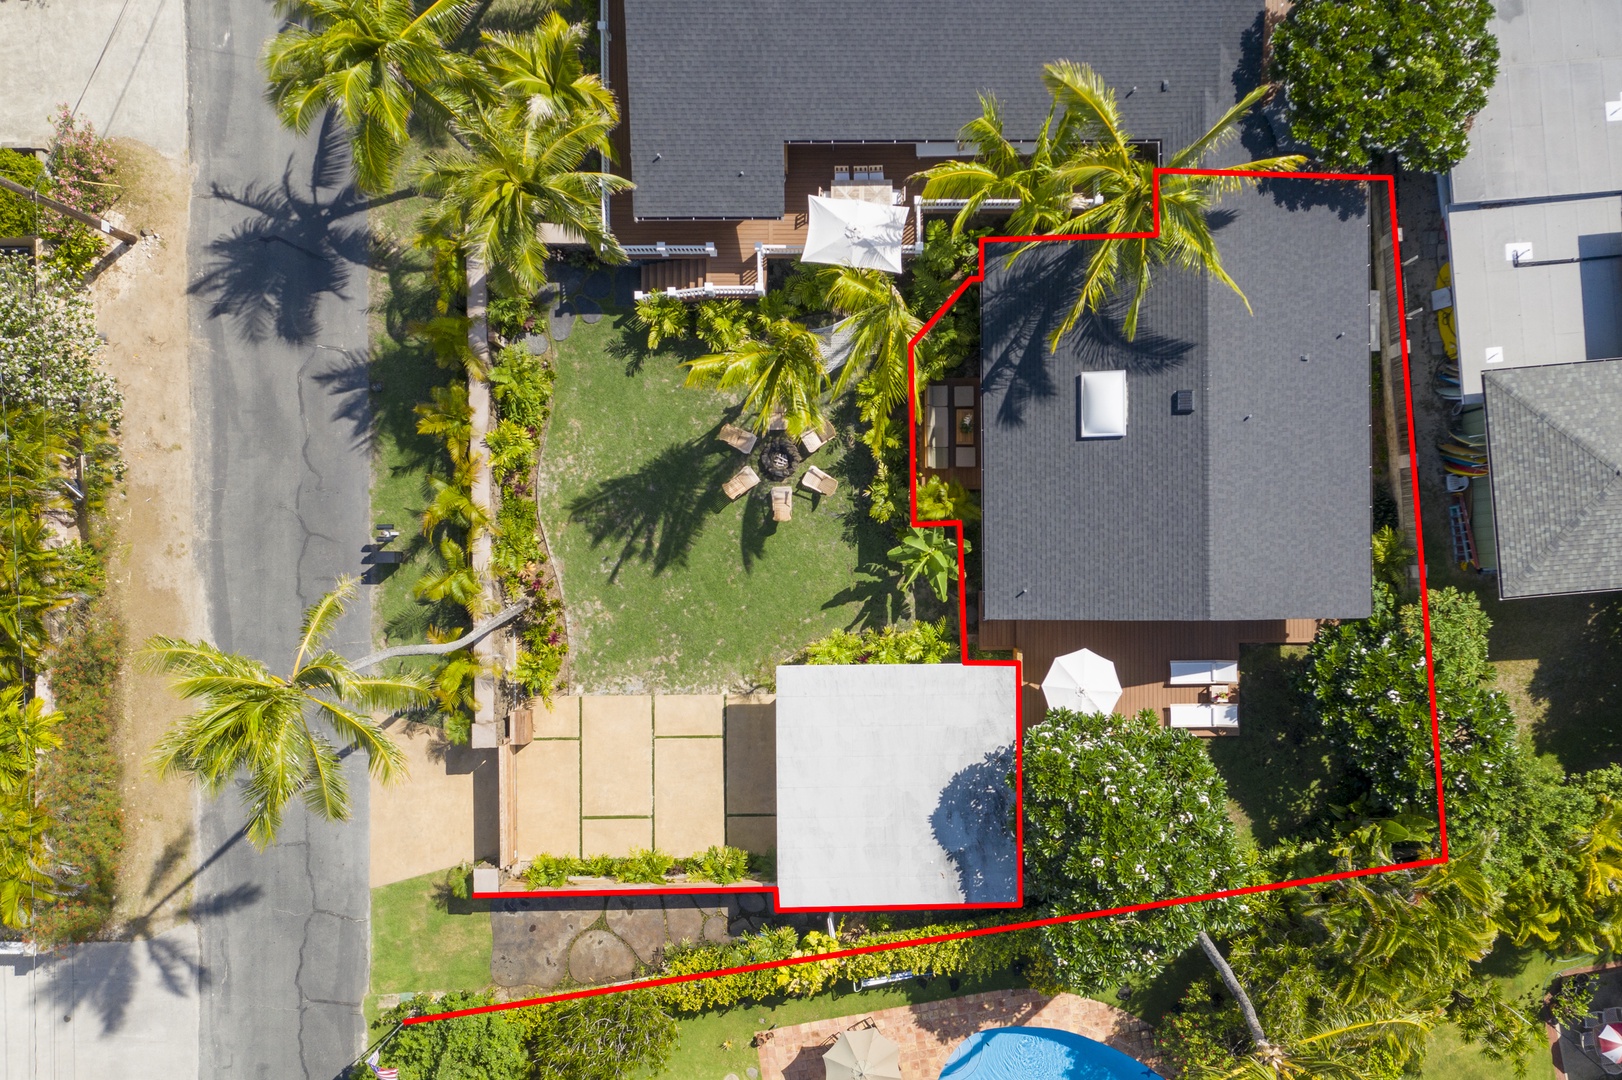 Kailua Vacation Rentals, Ranch Beach House - Aerial View showing Parking for 1 car and private entrance to home